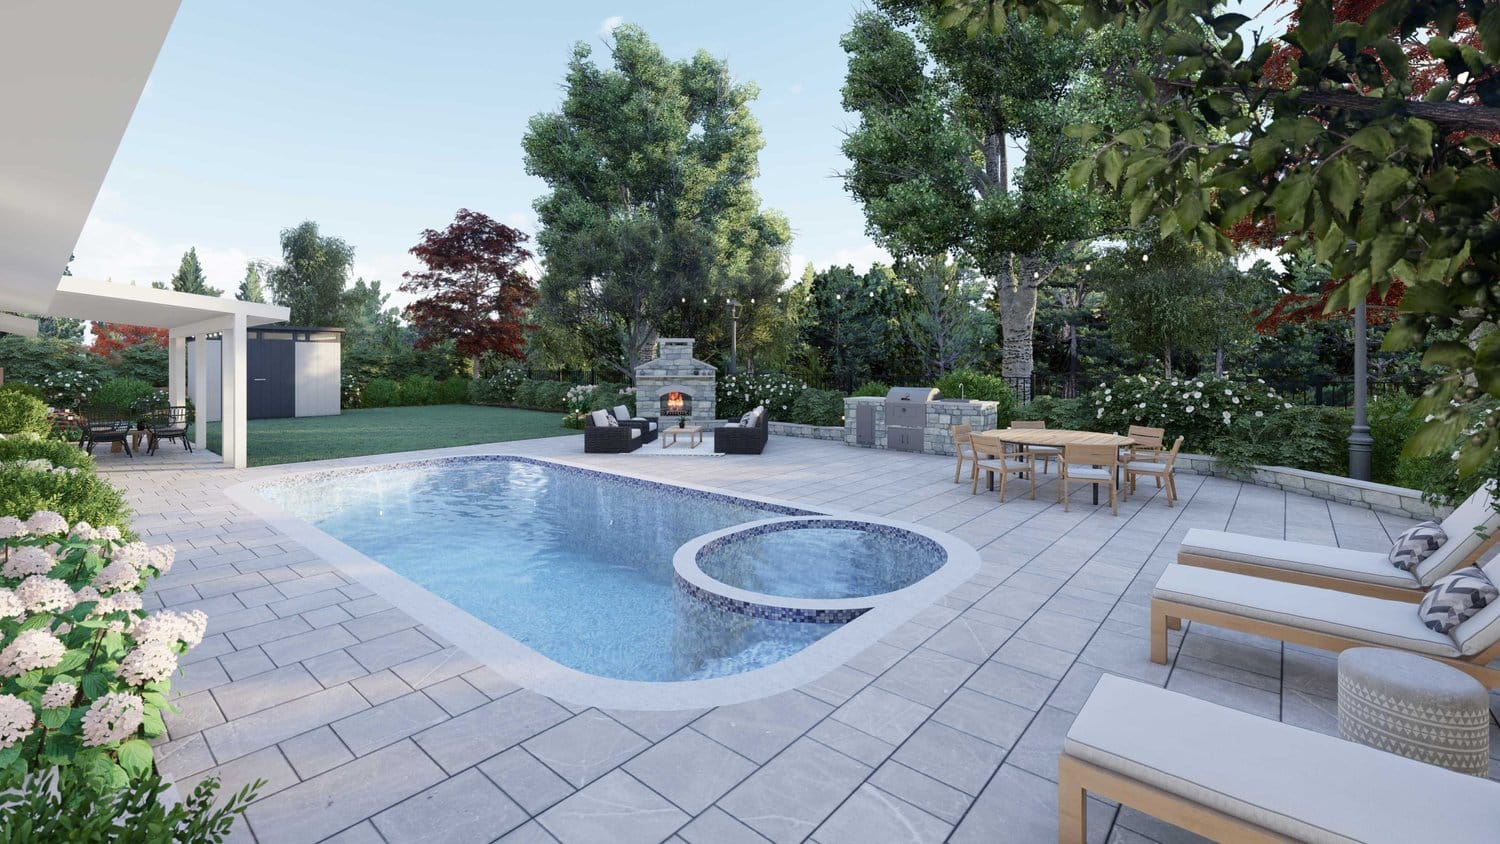 San Jose pool, pool lounge chairs with paver and patio with fire place